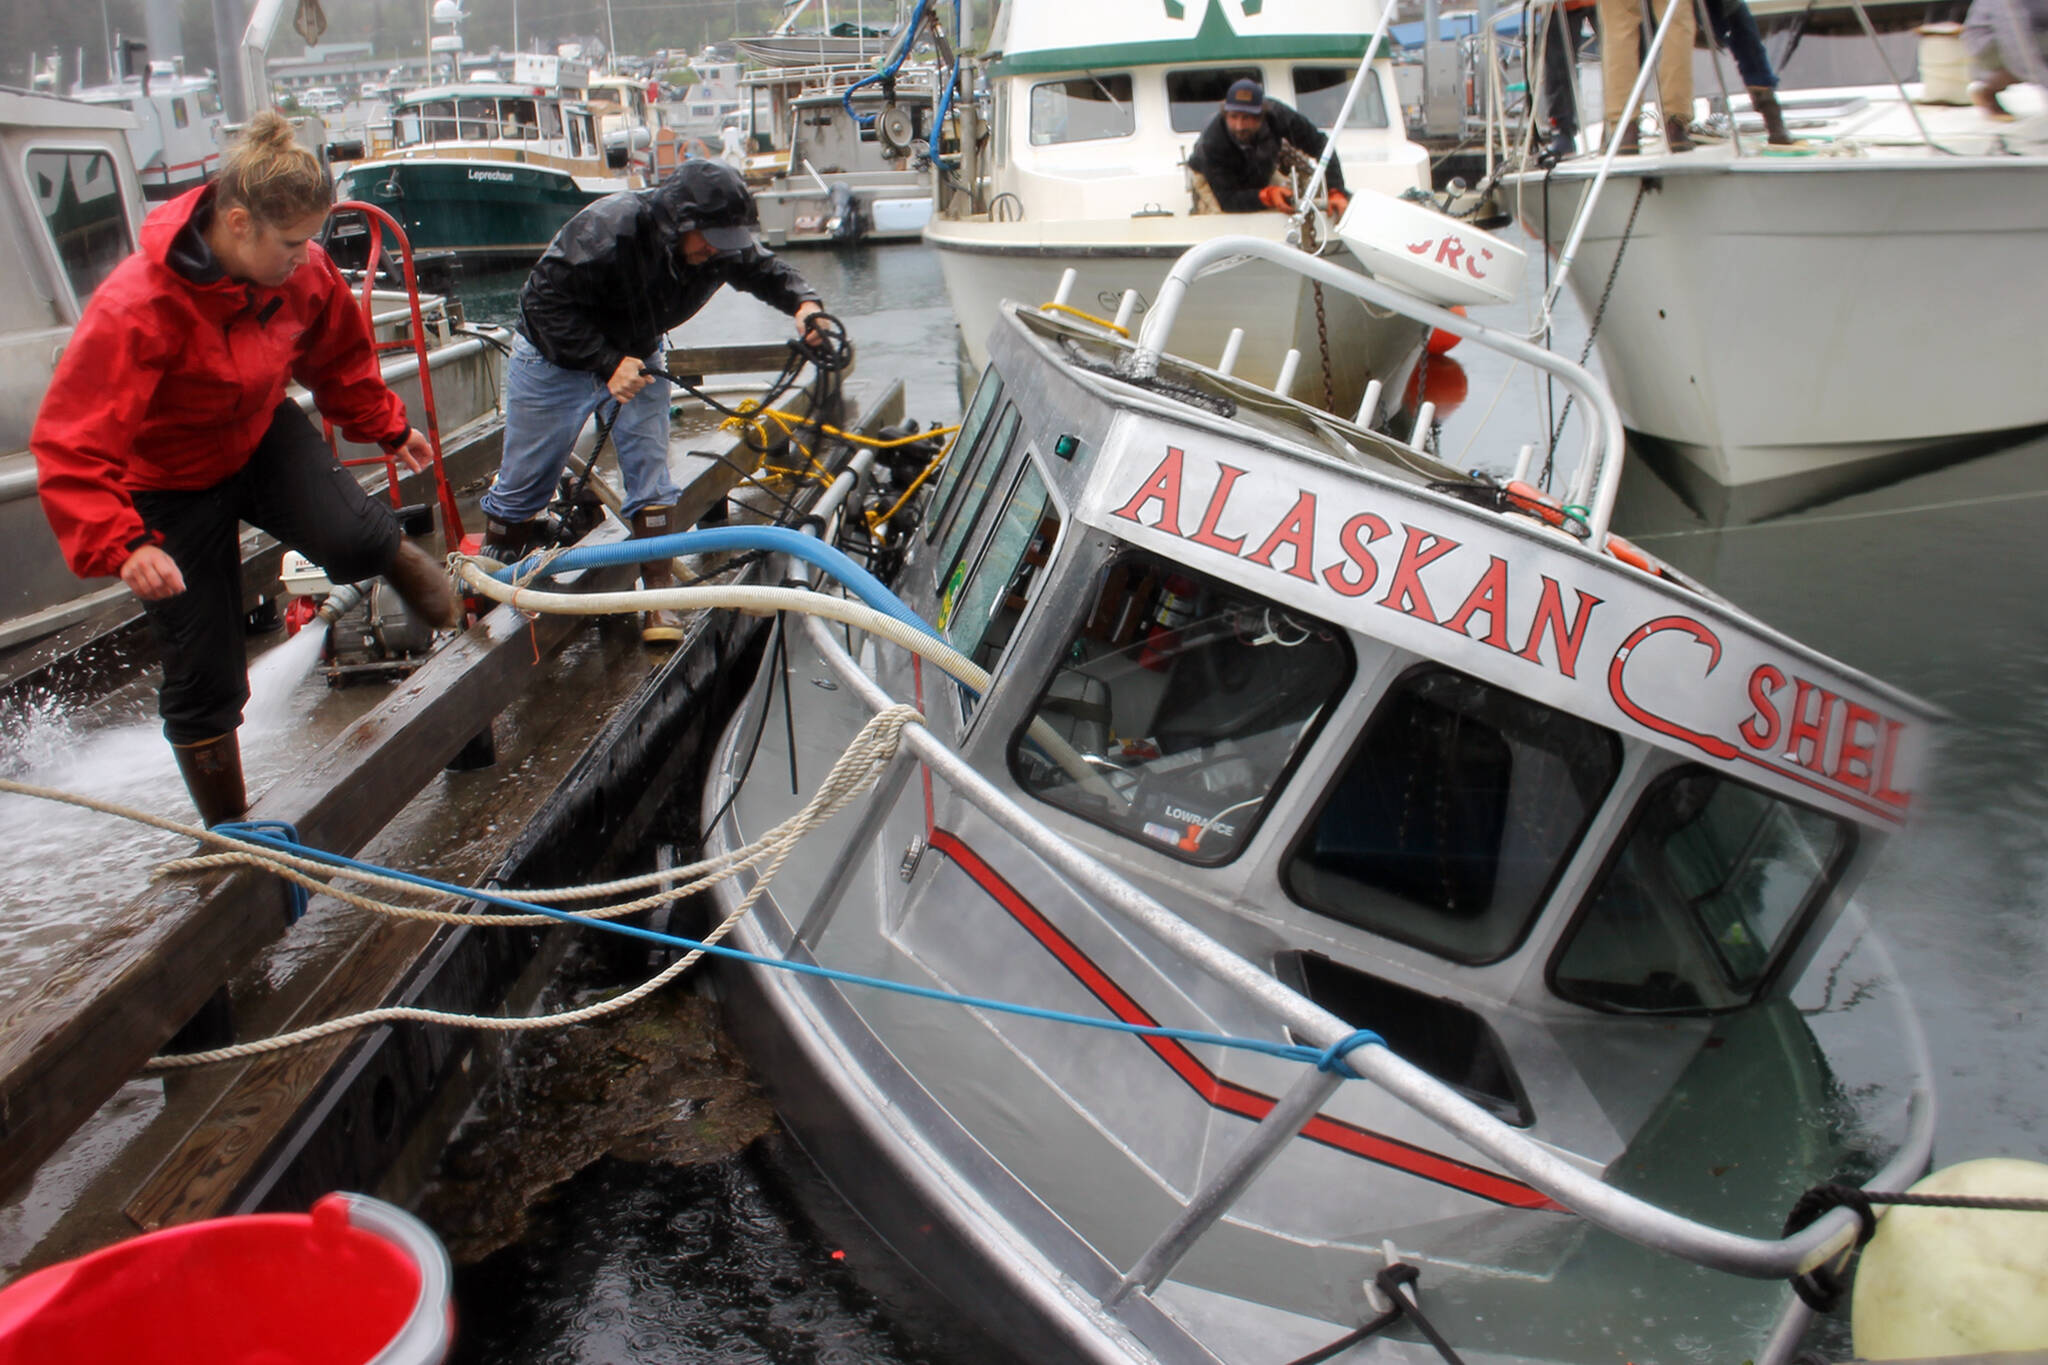 The Alaskan Shel had been taking in water for more than an hour by 7 p.m. Wednesday. (Clarise Larson / Juneau Empiure)